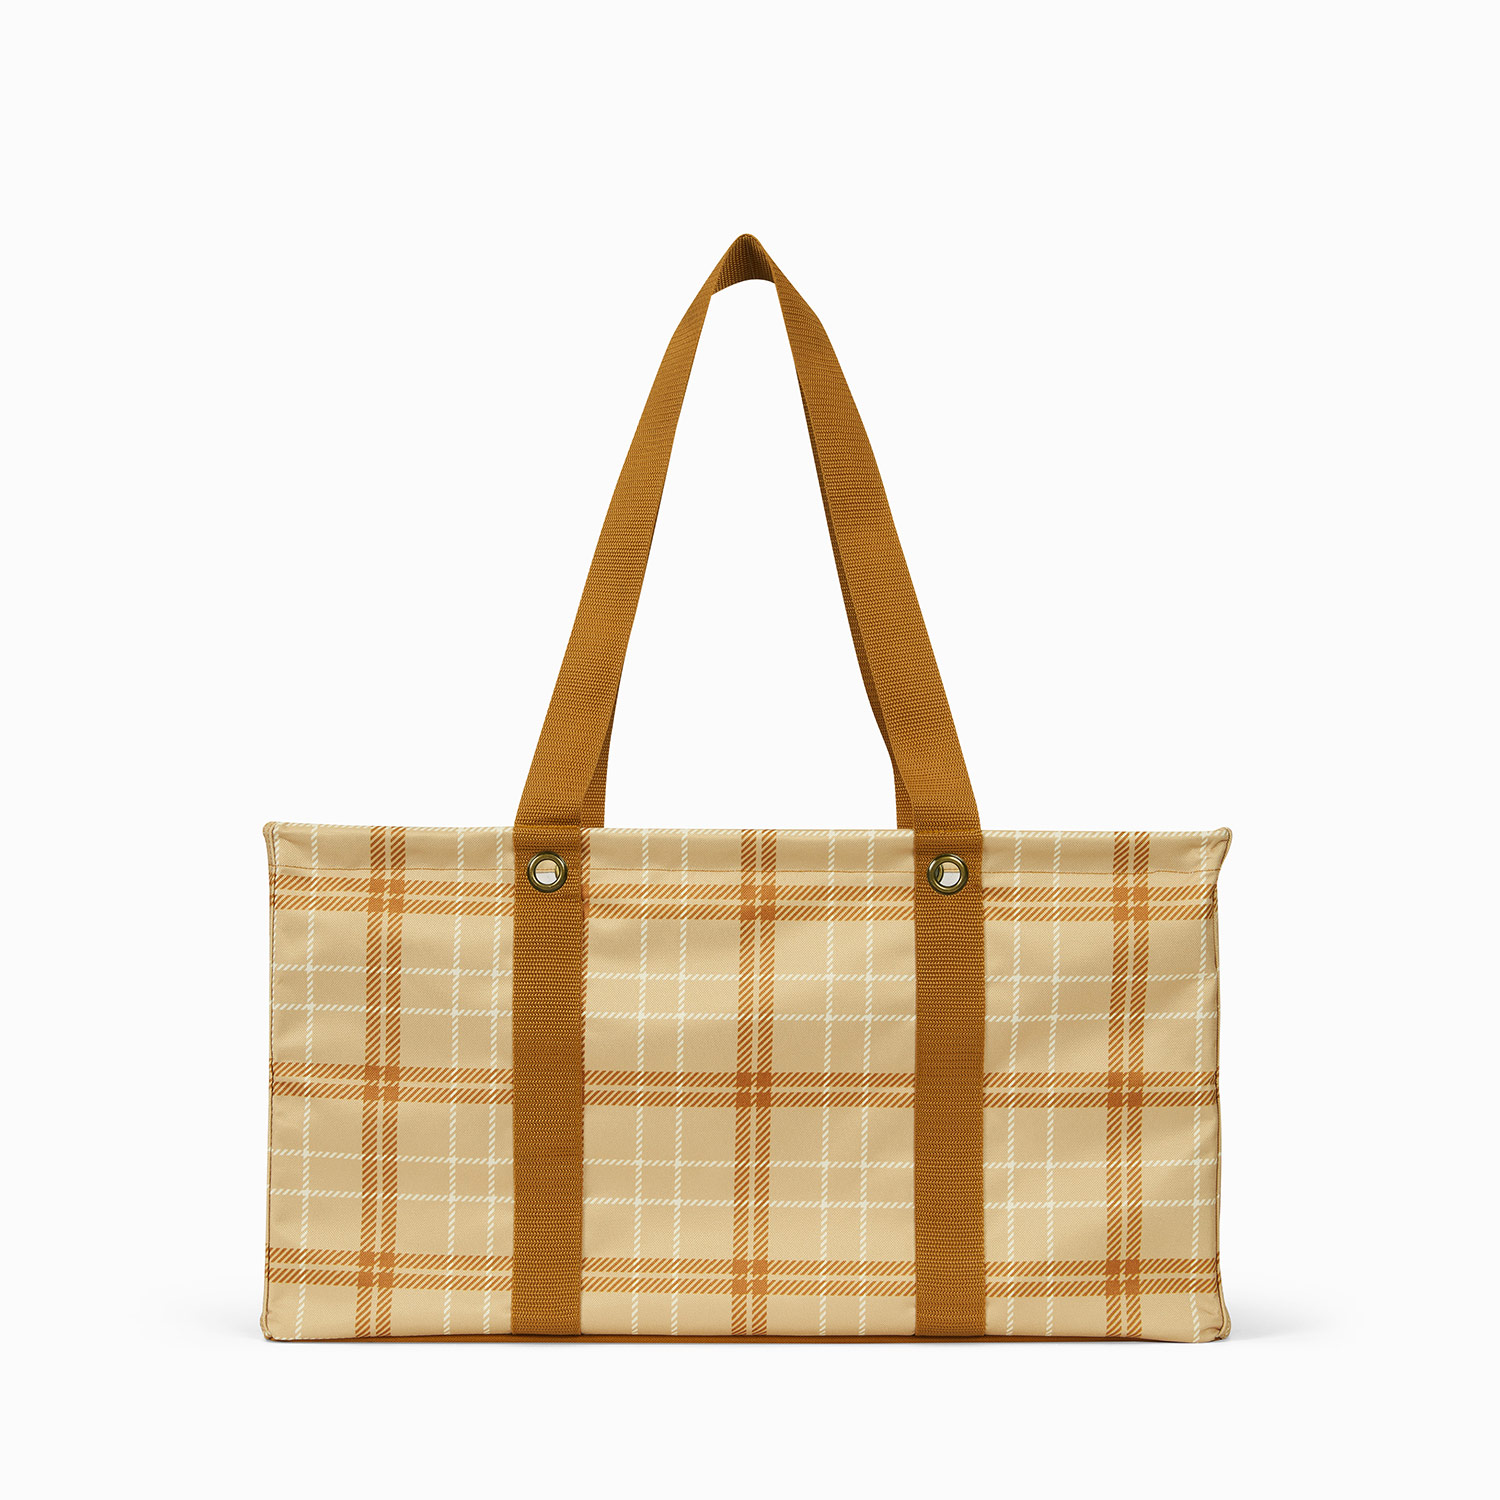 Thirty One DELUXE UTILITY Tote in Holiday Plaid NWT